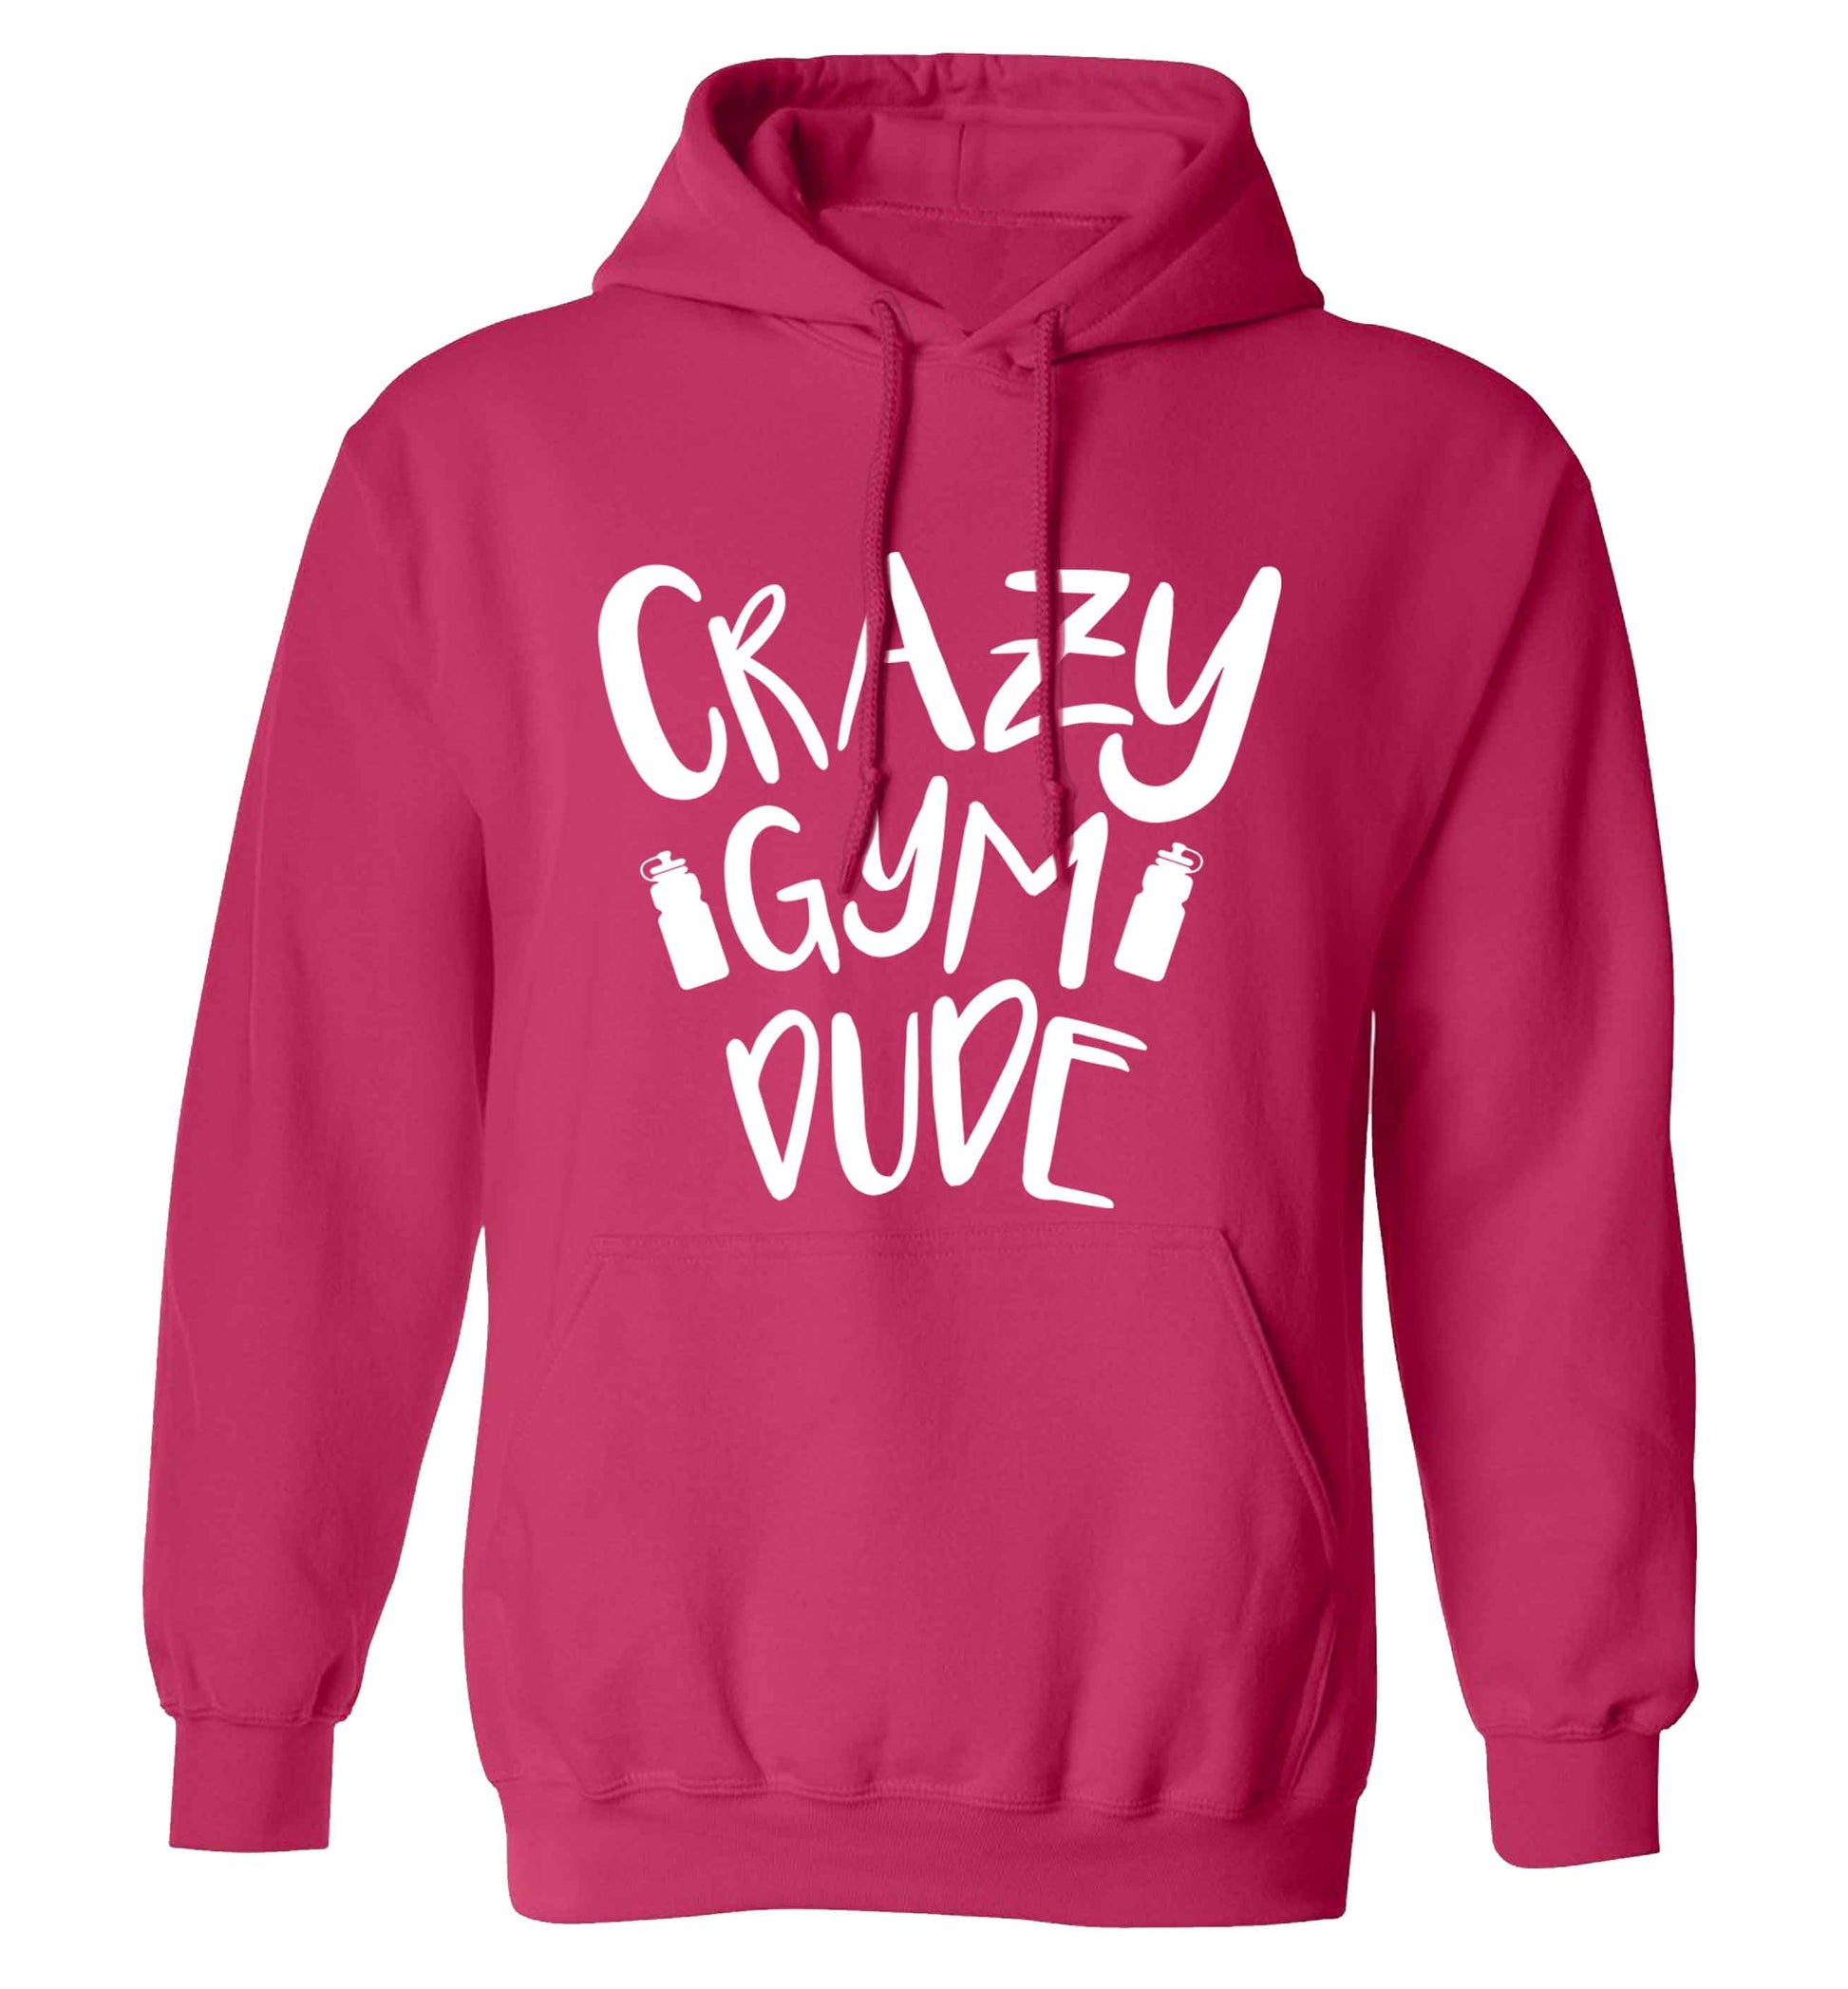 Crazy gym dude adults unisex pink hoodie 2XL